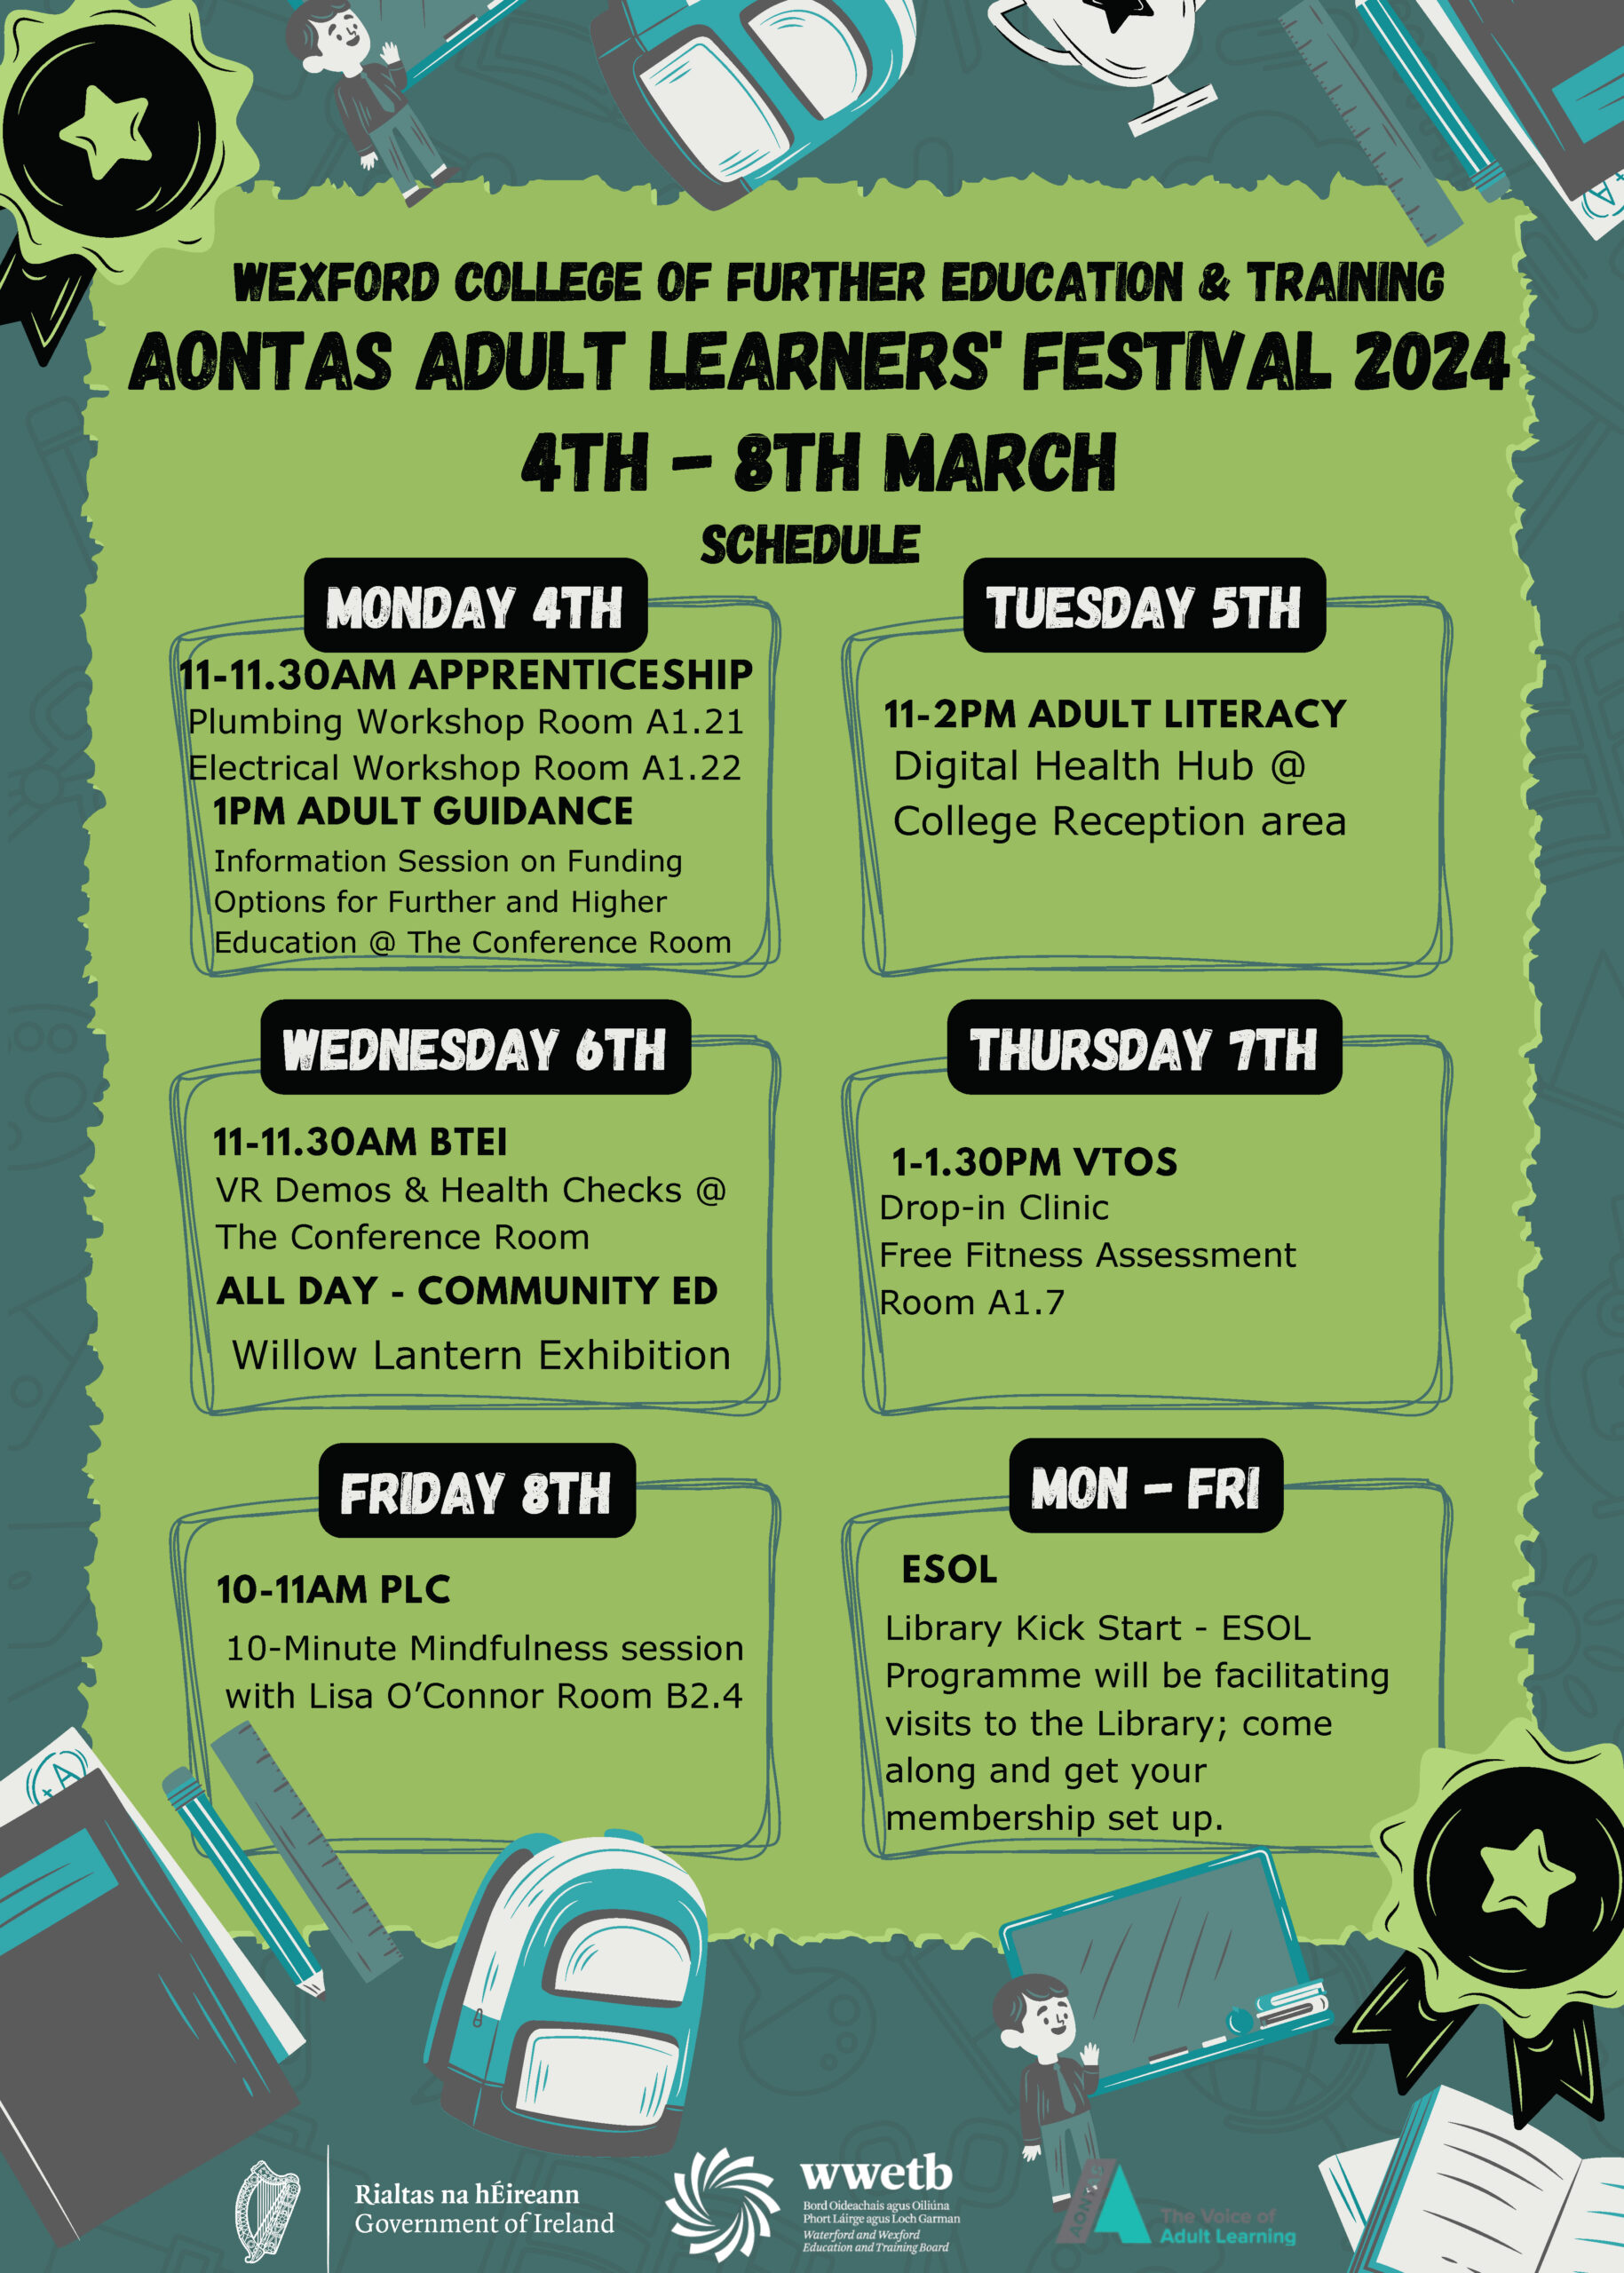 Wexford College of Further Education and Training celebrates Aontas Adult Learners Week